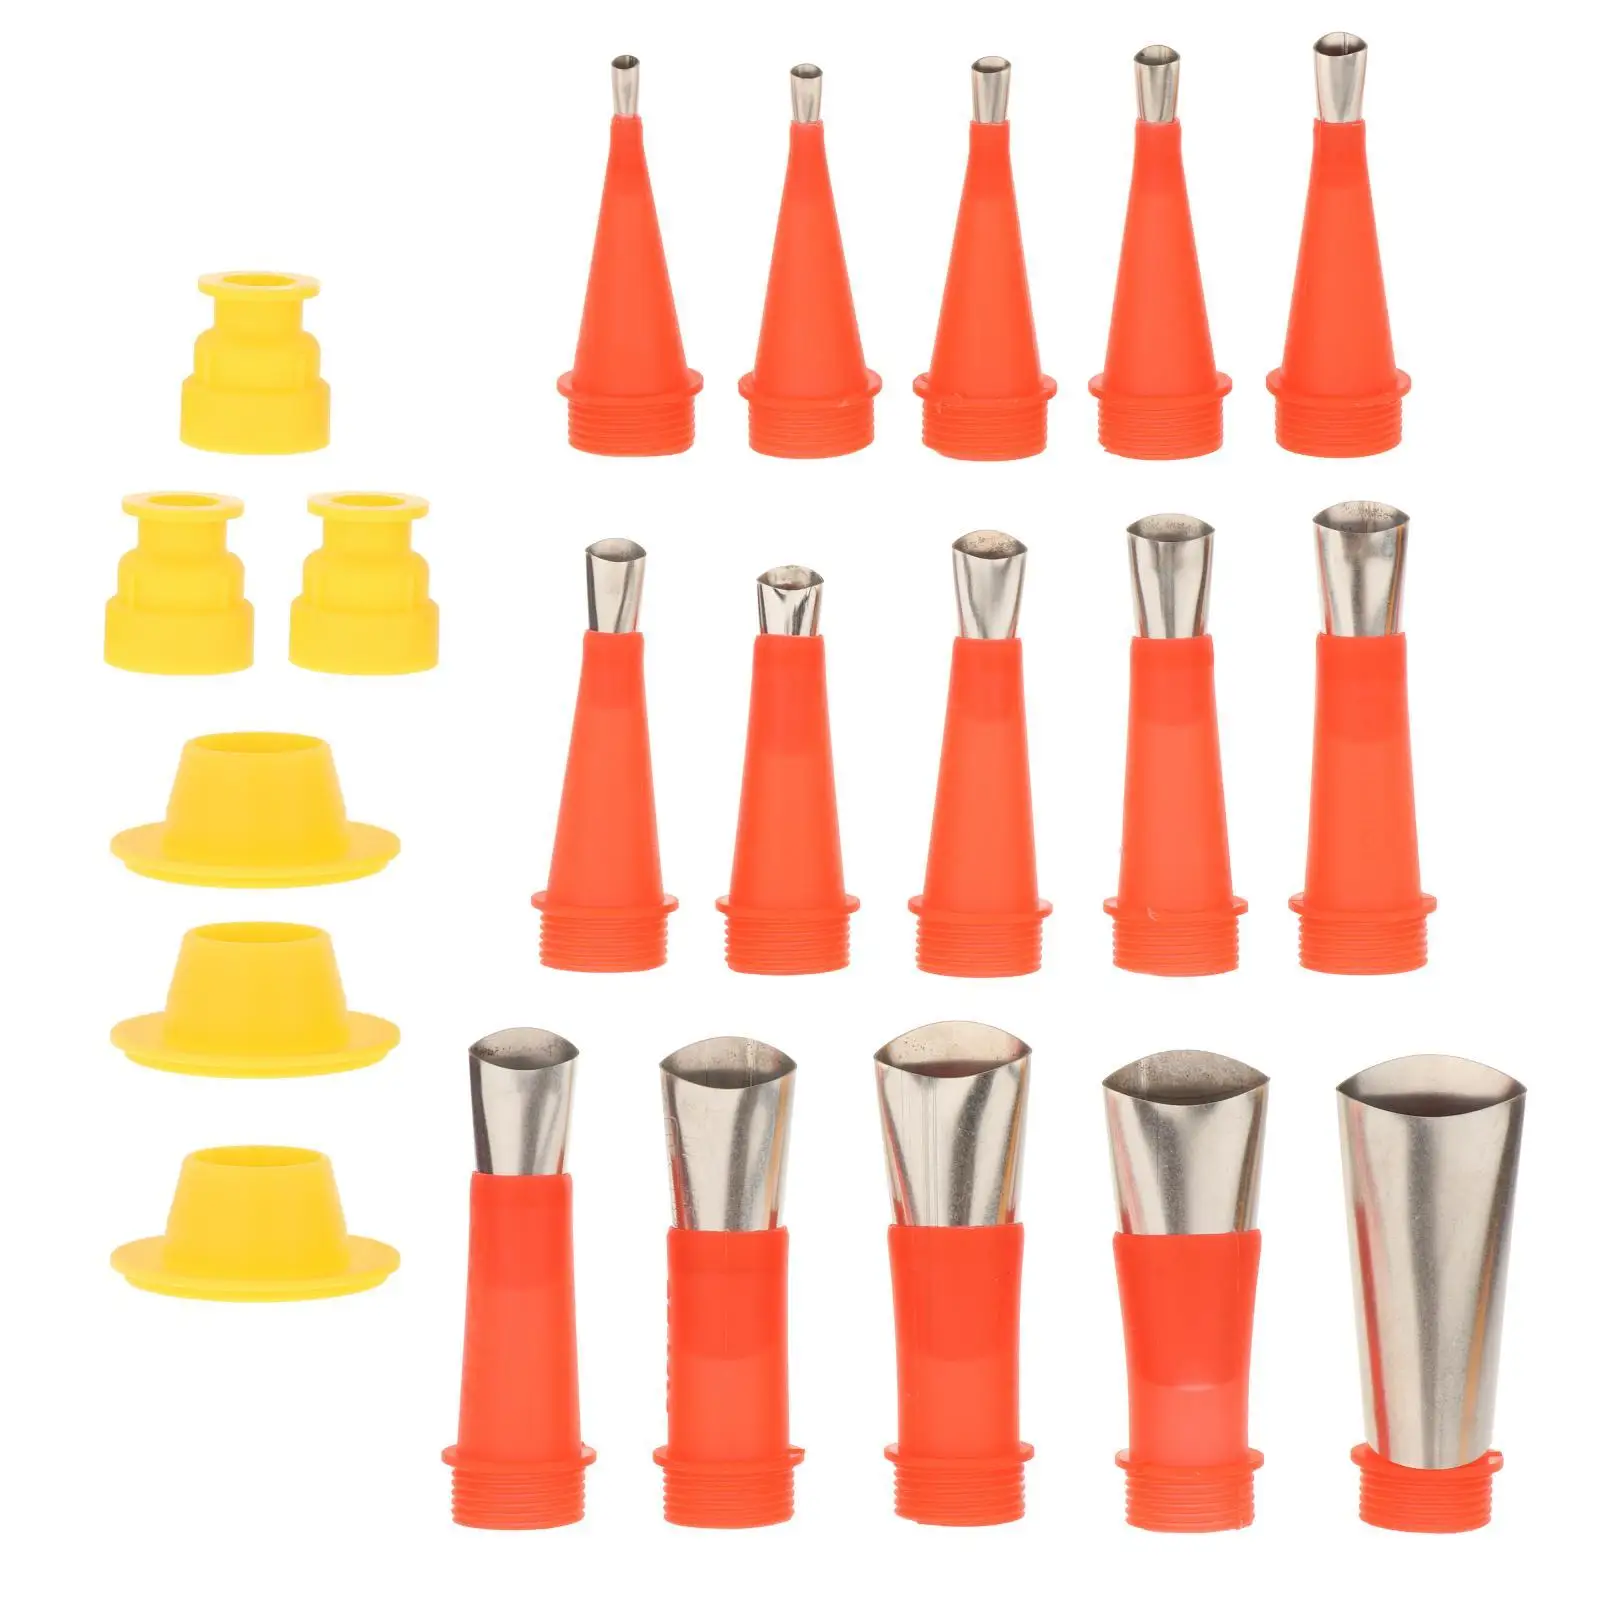 21Pcs Reusable Caulking Nozzle Applicator Replacement with Bases Caulking Finisher Nozzle Kit for Sausage Bathroom Door Kitchen